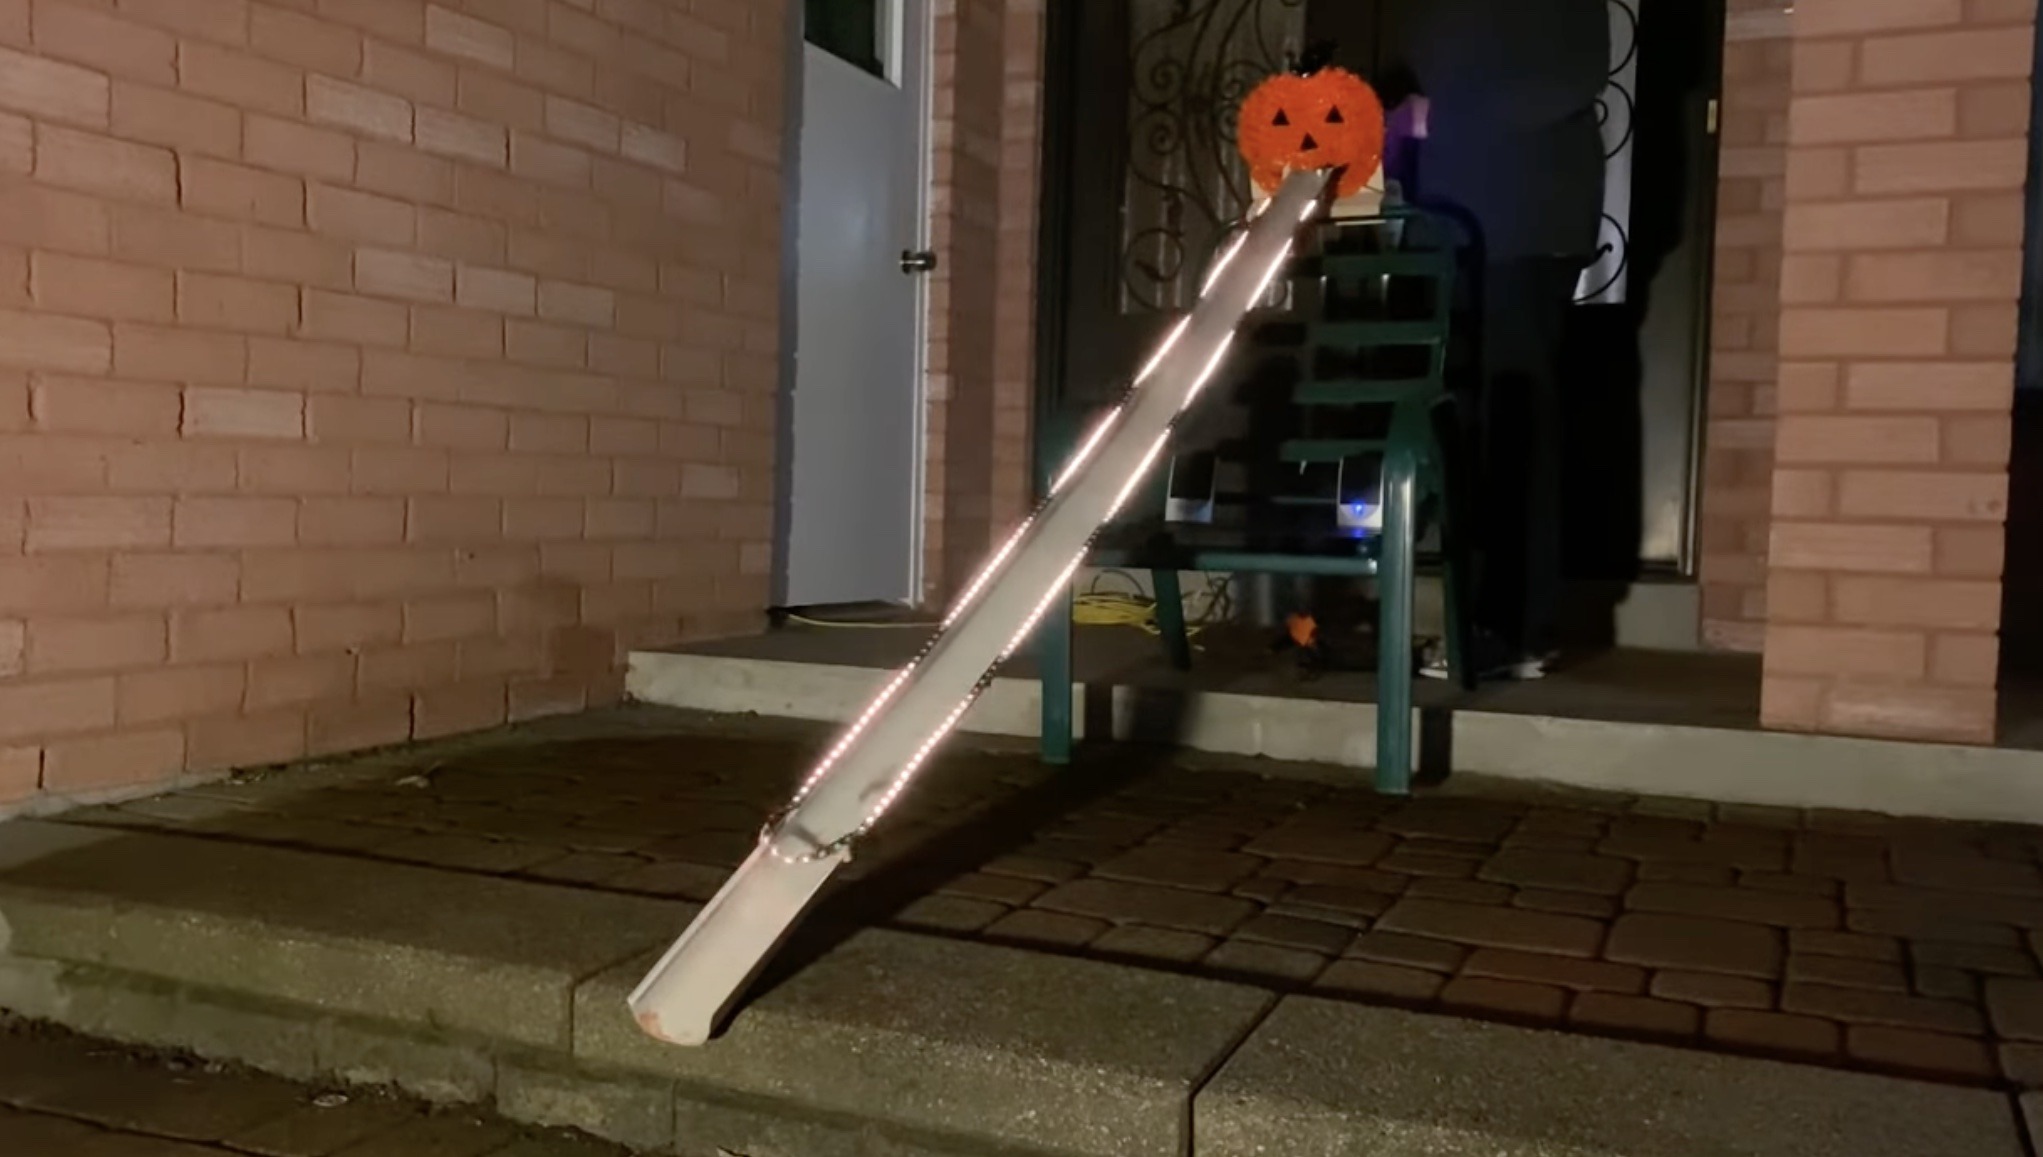 The Treat Trough of Terror spits out Halloween candy